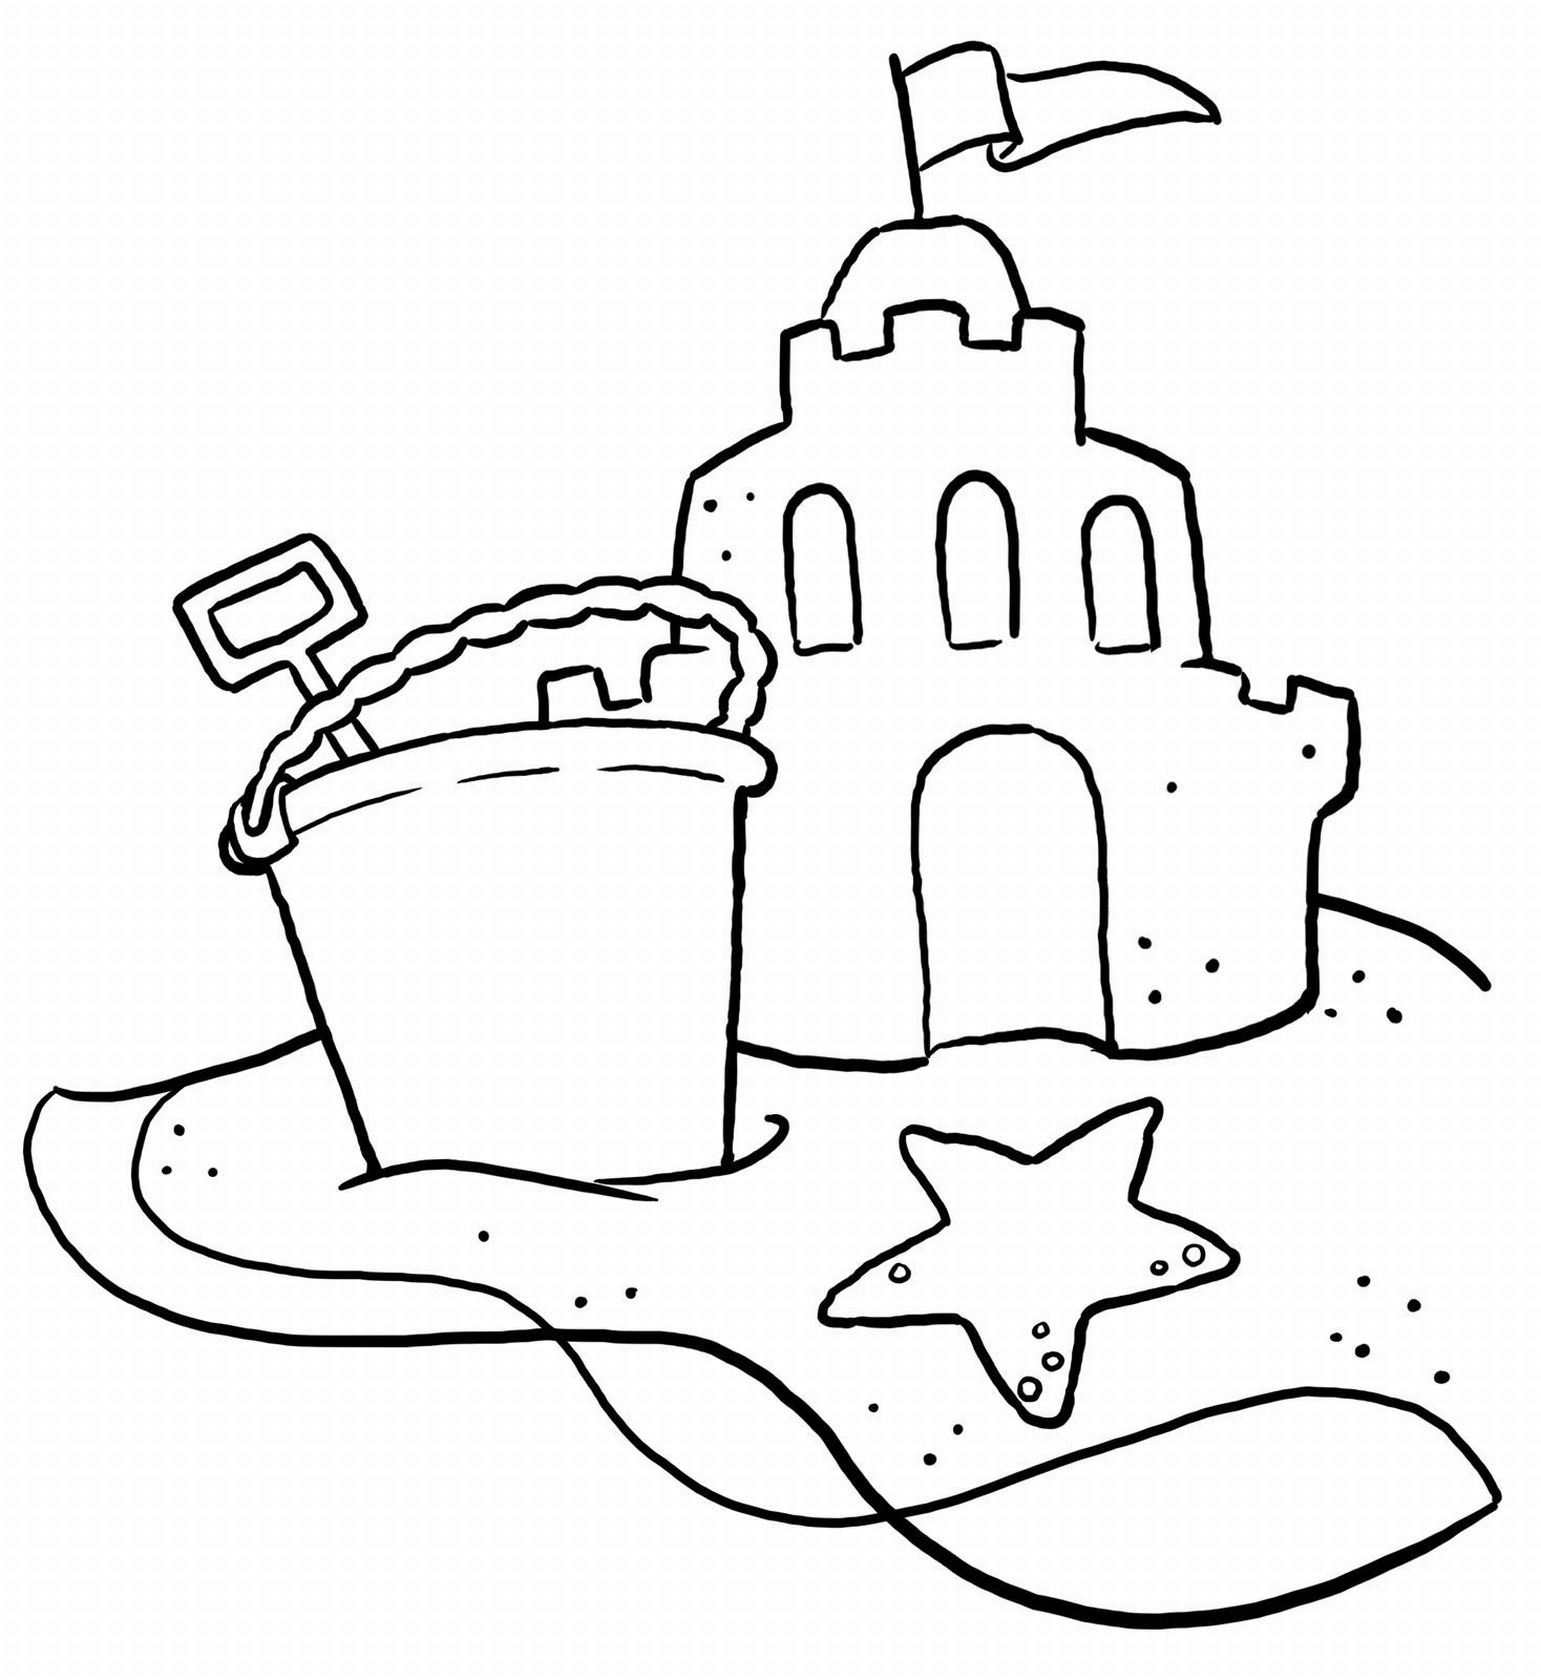 Beach coloring pages to download and print for free